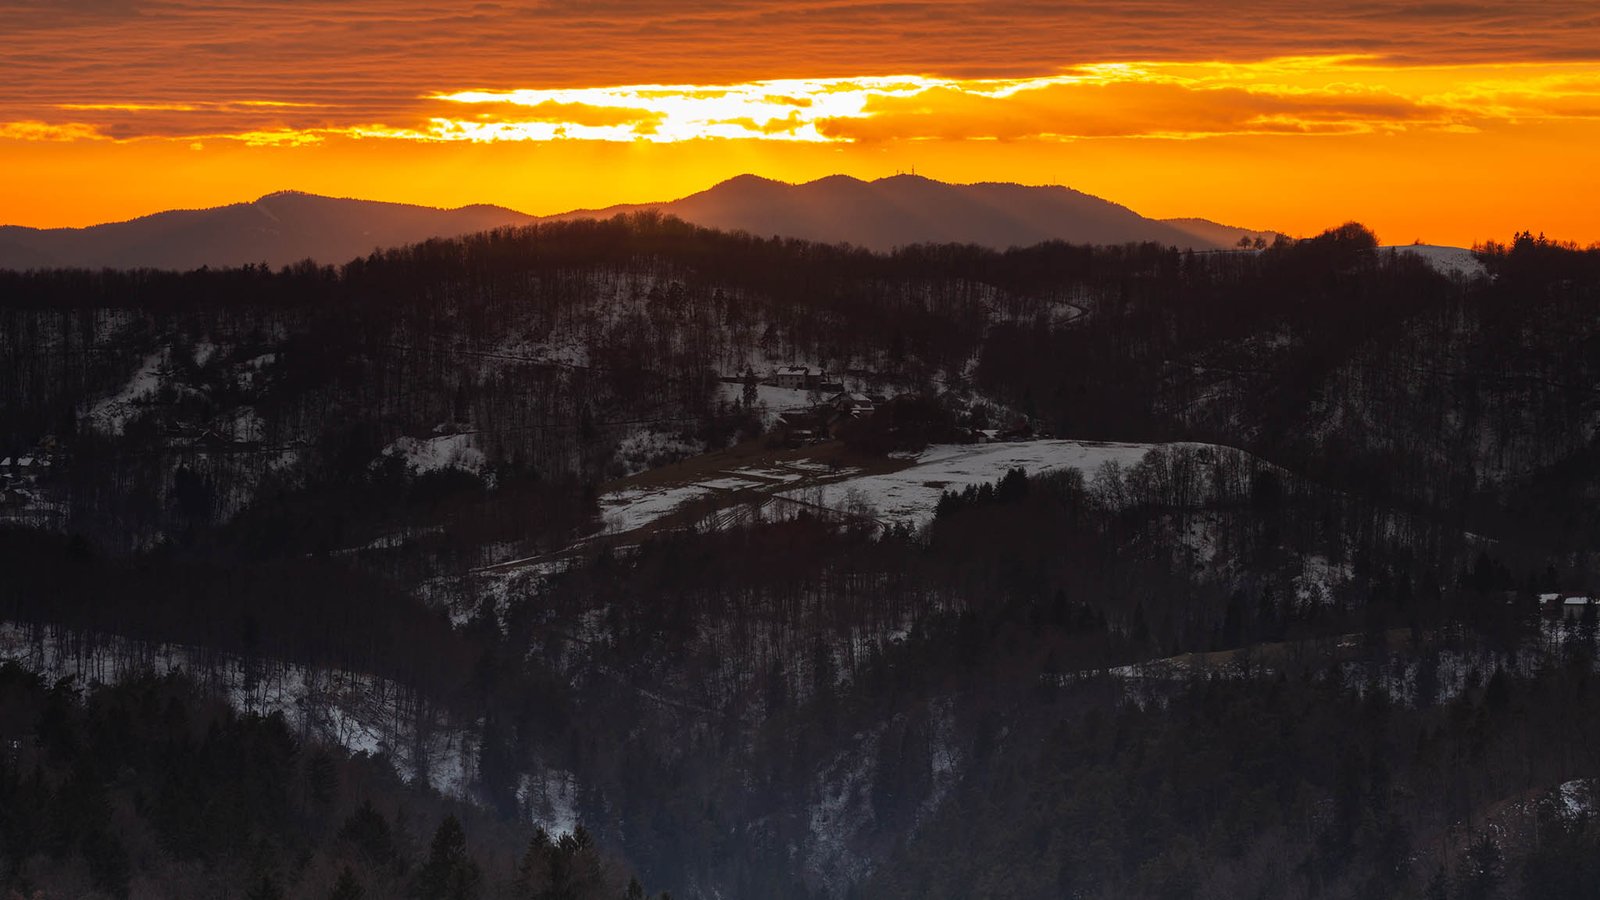 View across to Krim mountain at sunset, seen from a hill in Prezganje in the hills to the east of Ljubljana, Slovenia